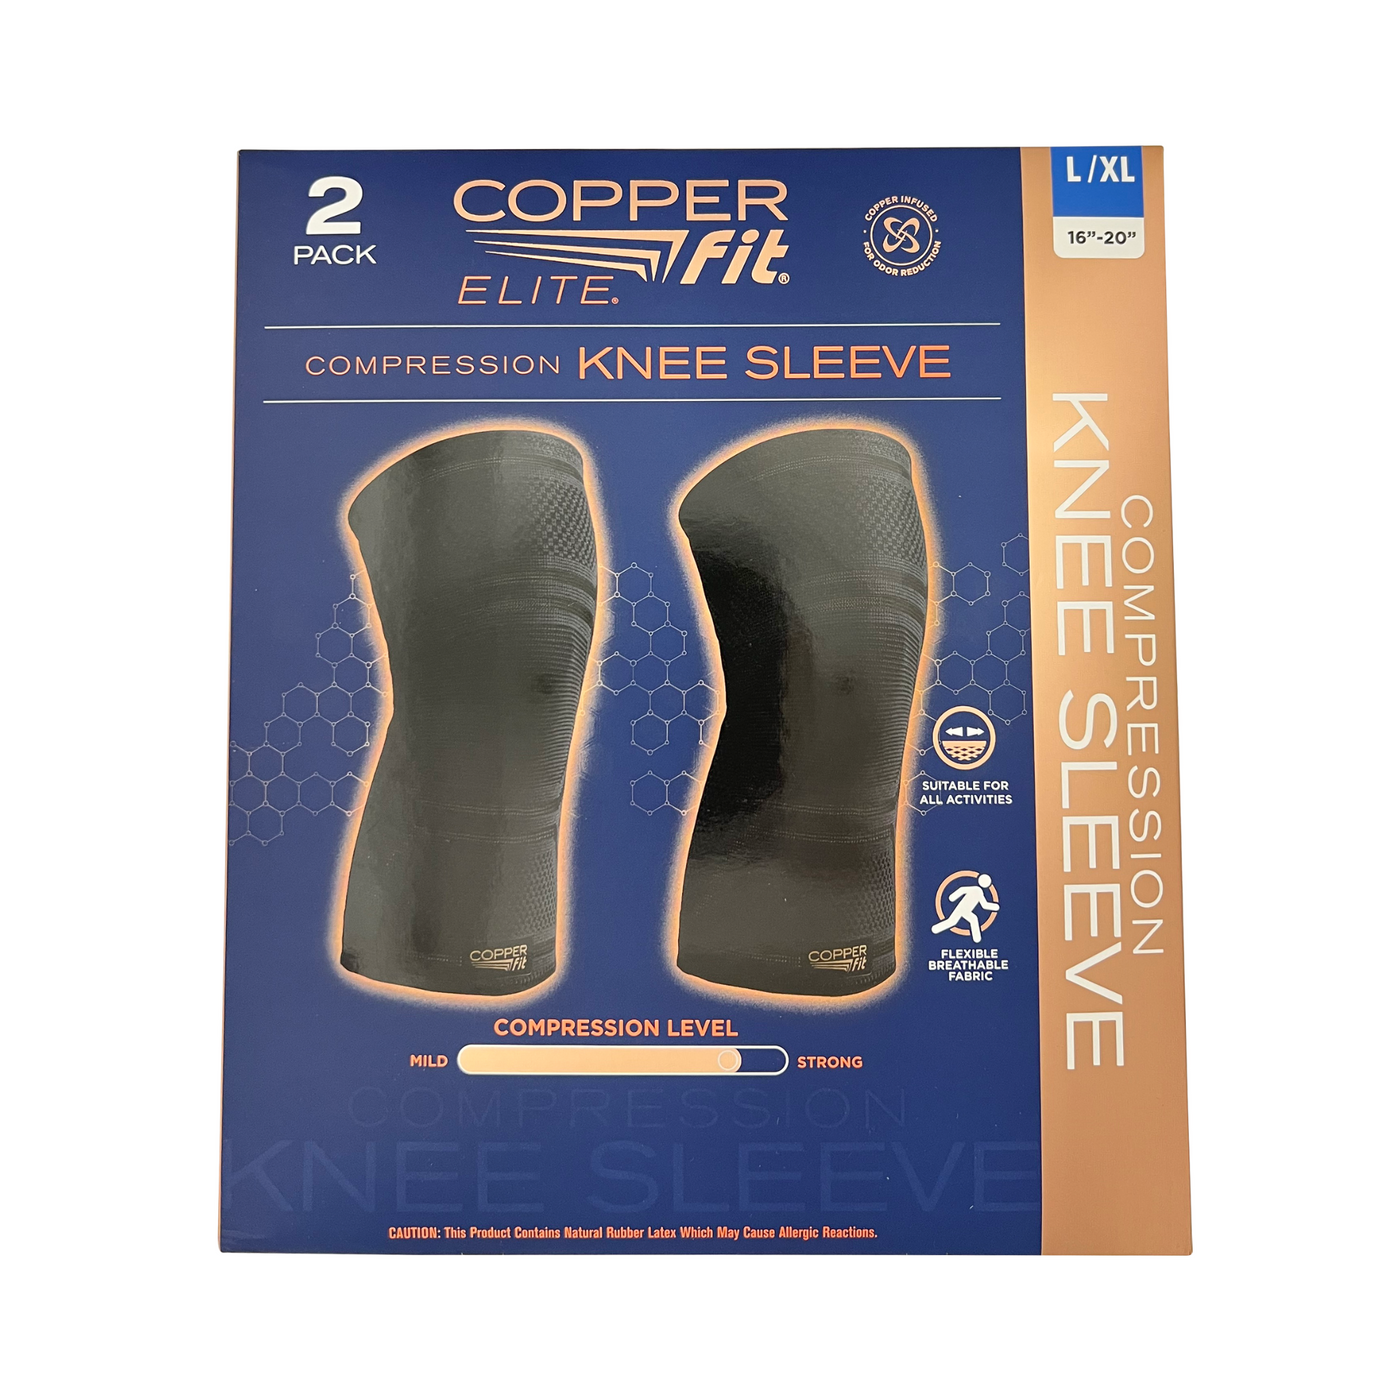 Brand New Copper Fit Elite Copper Infused Knee Compression Sleeve L/XL - 2  Pack